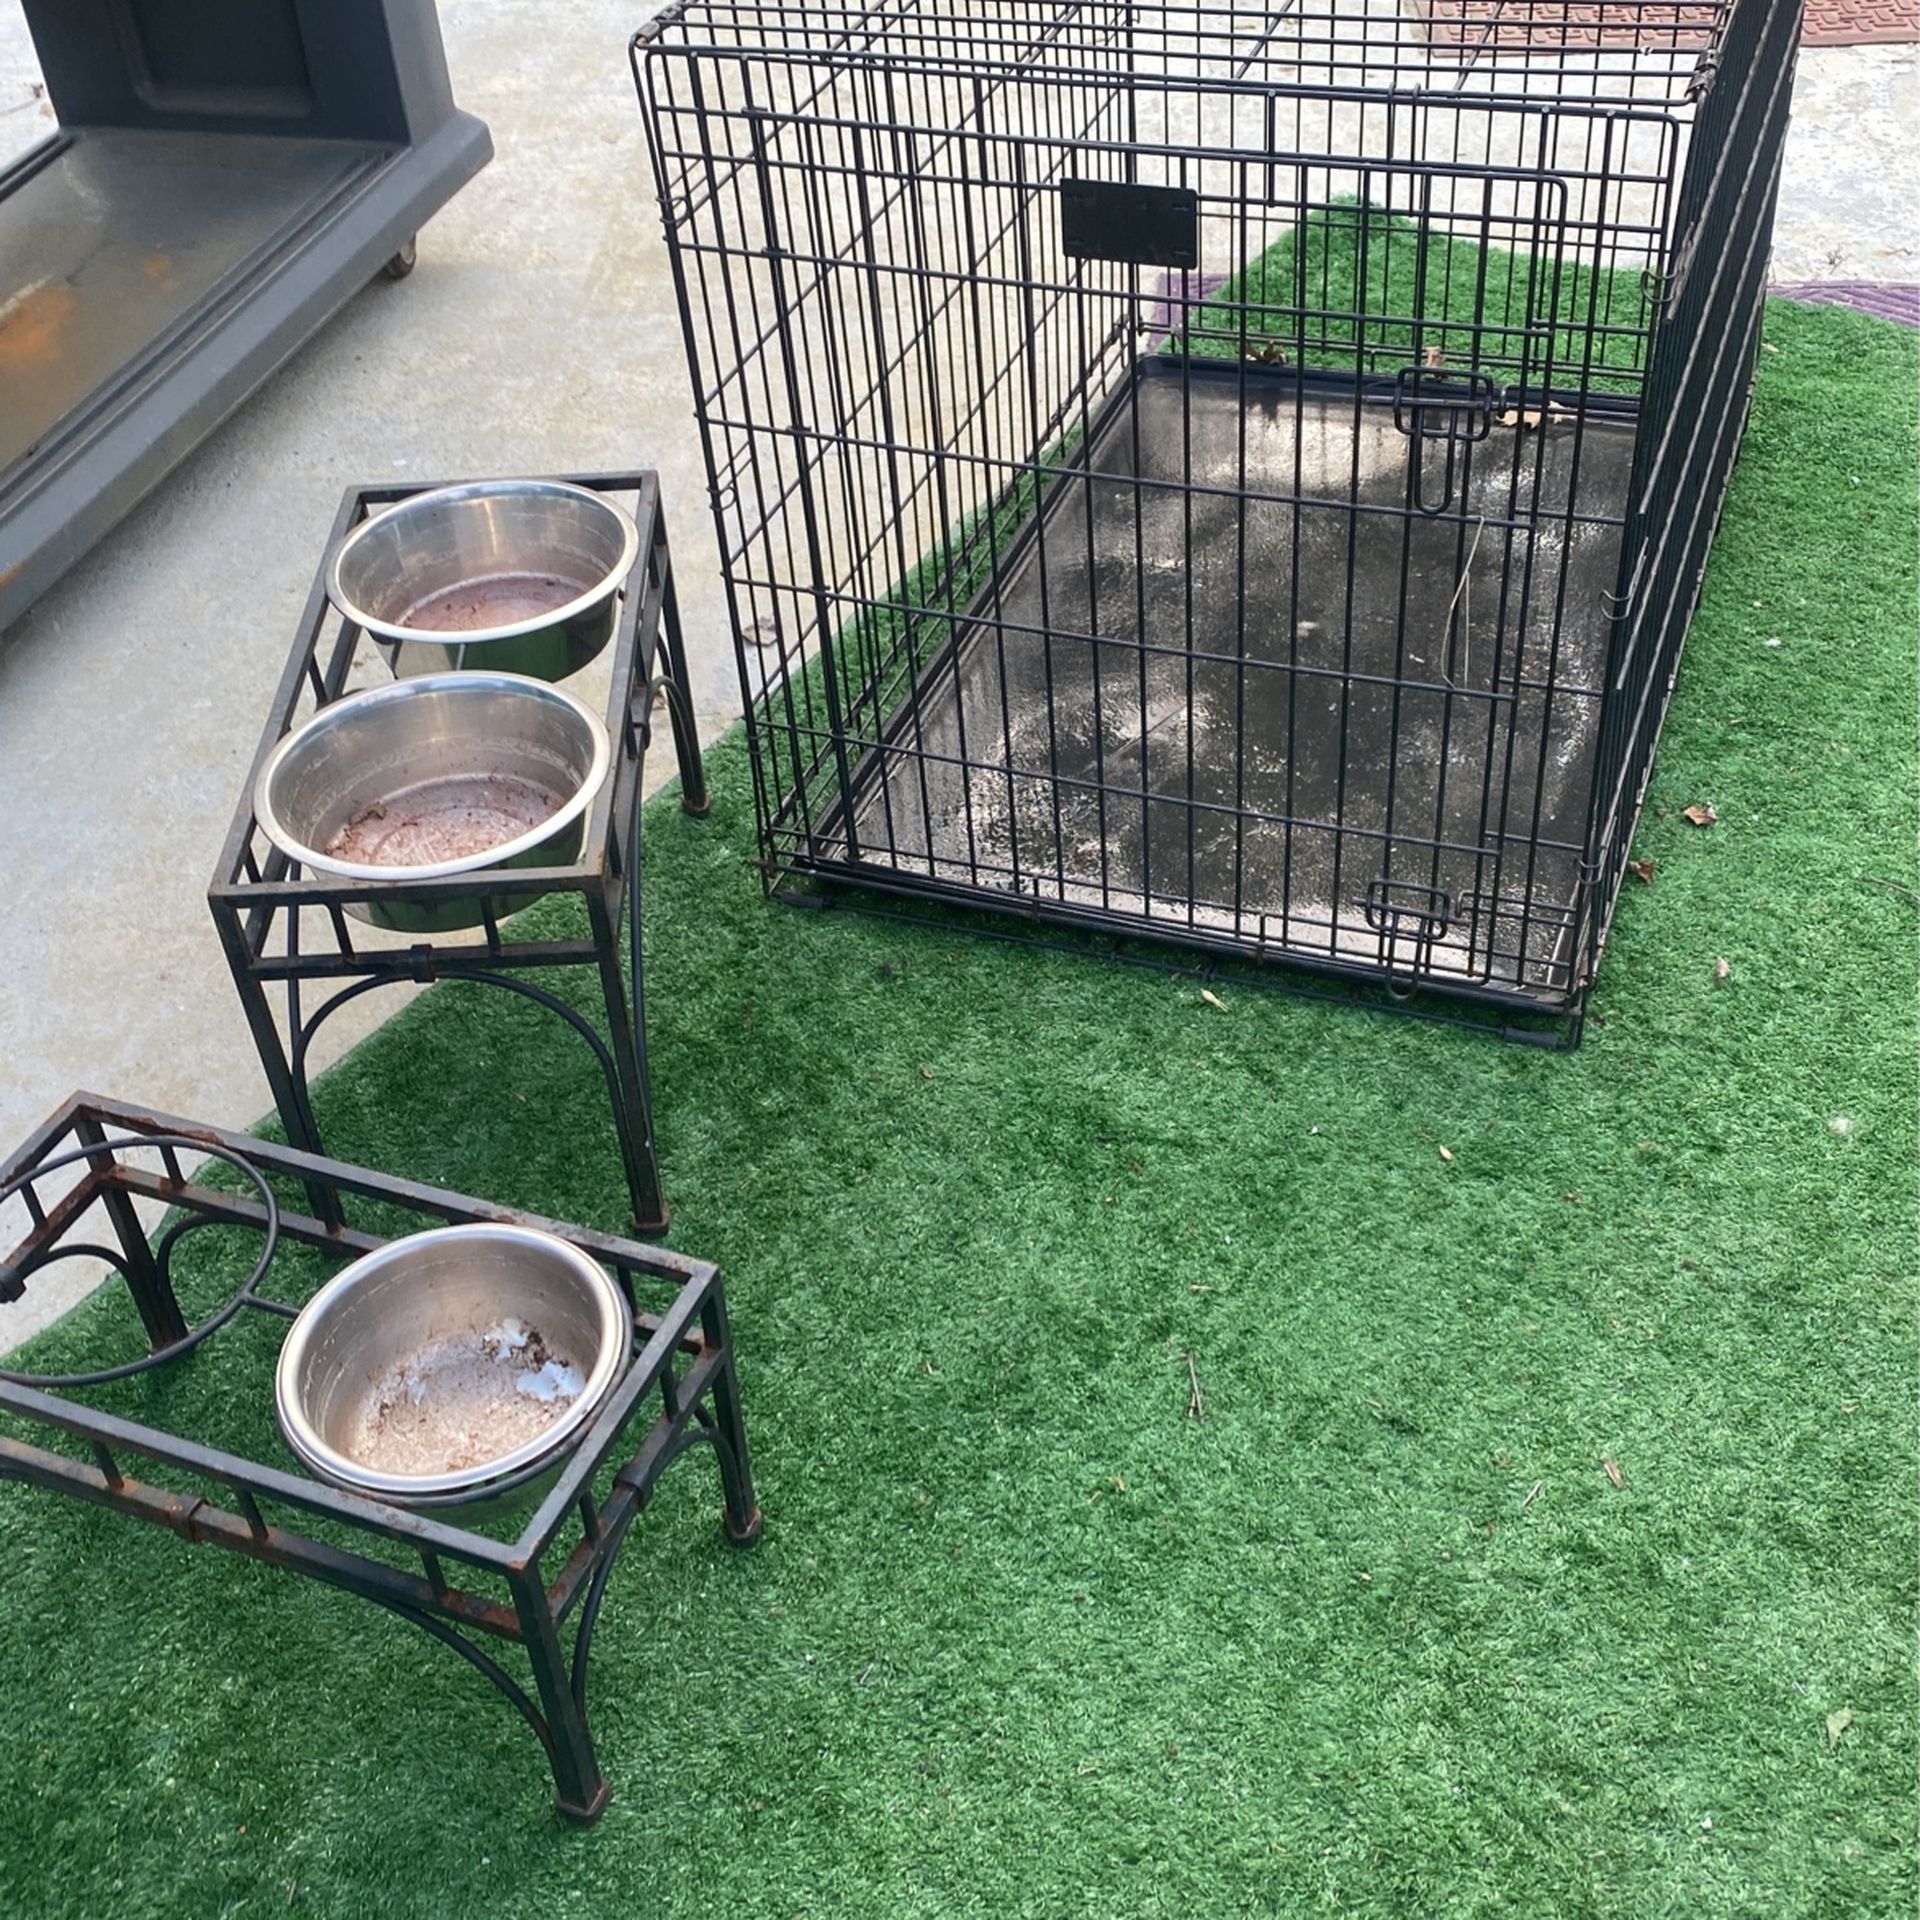 X-Large Dog Crate 